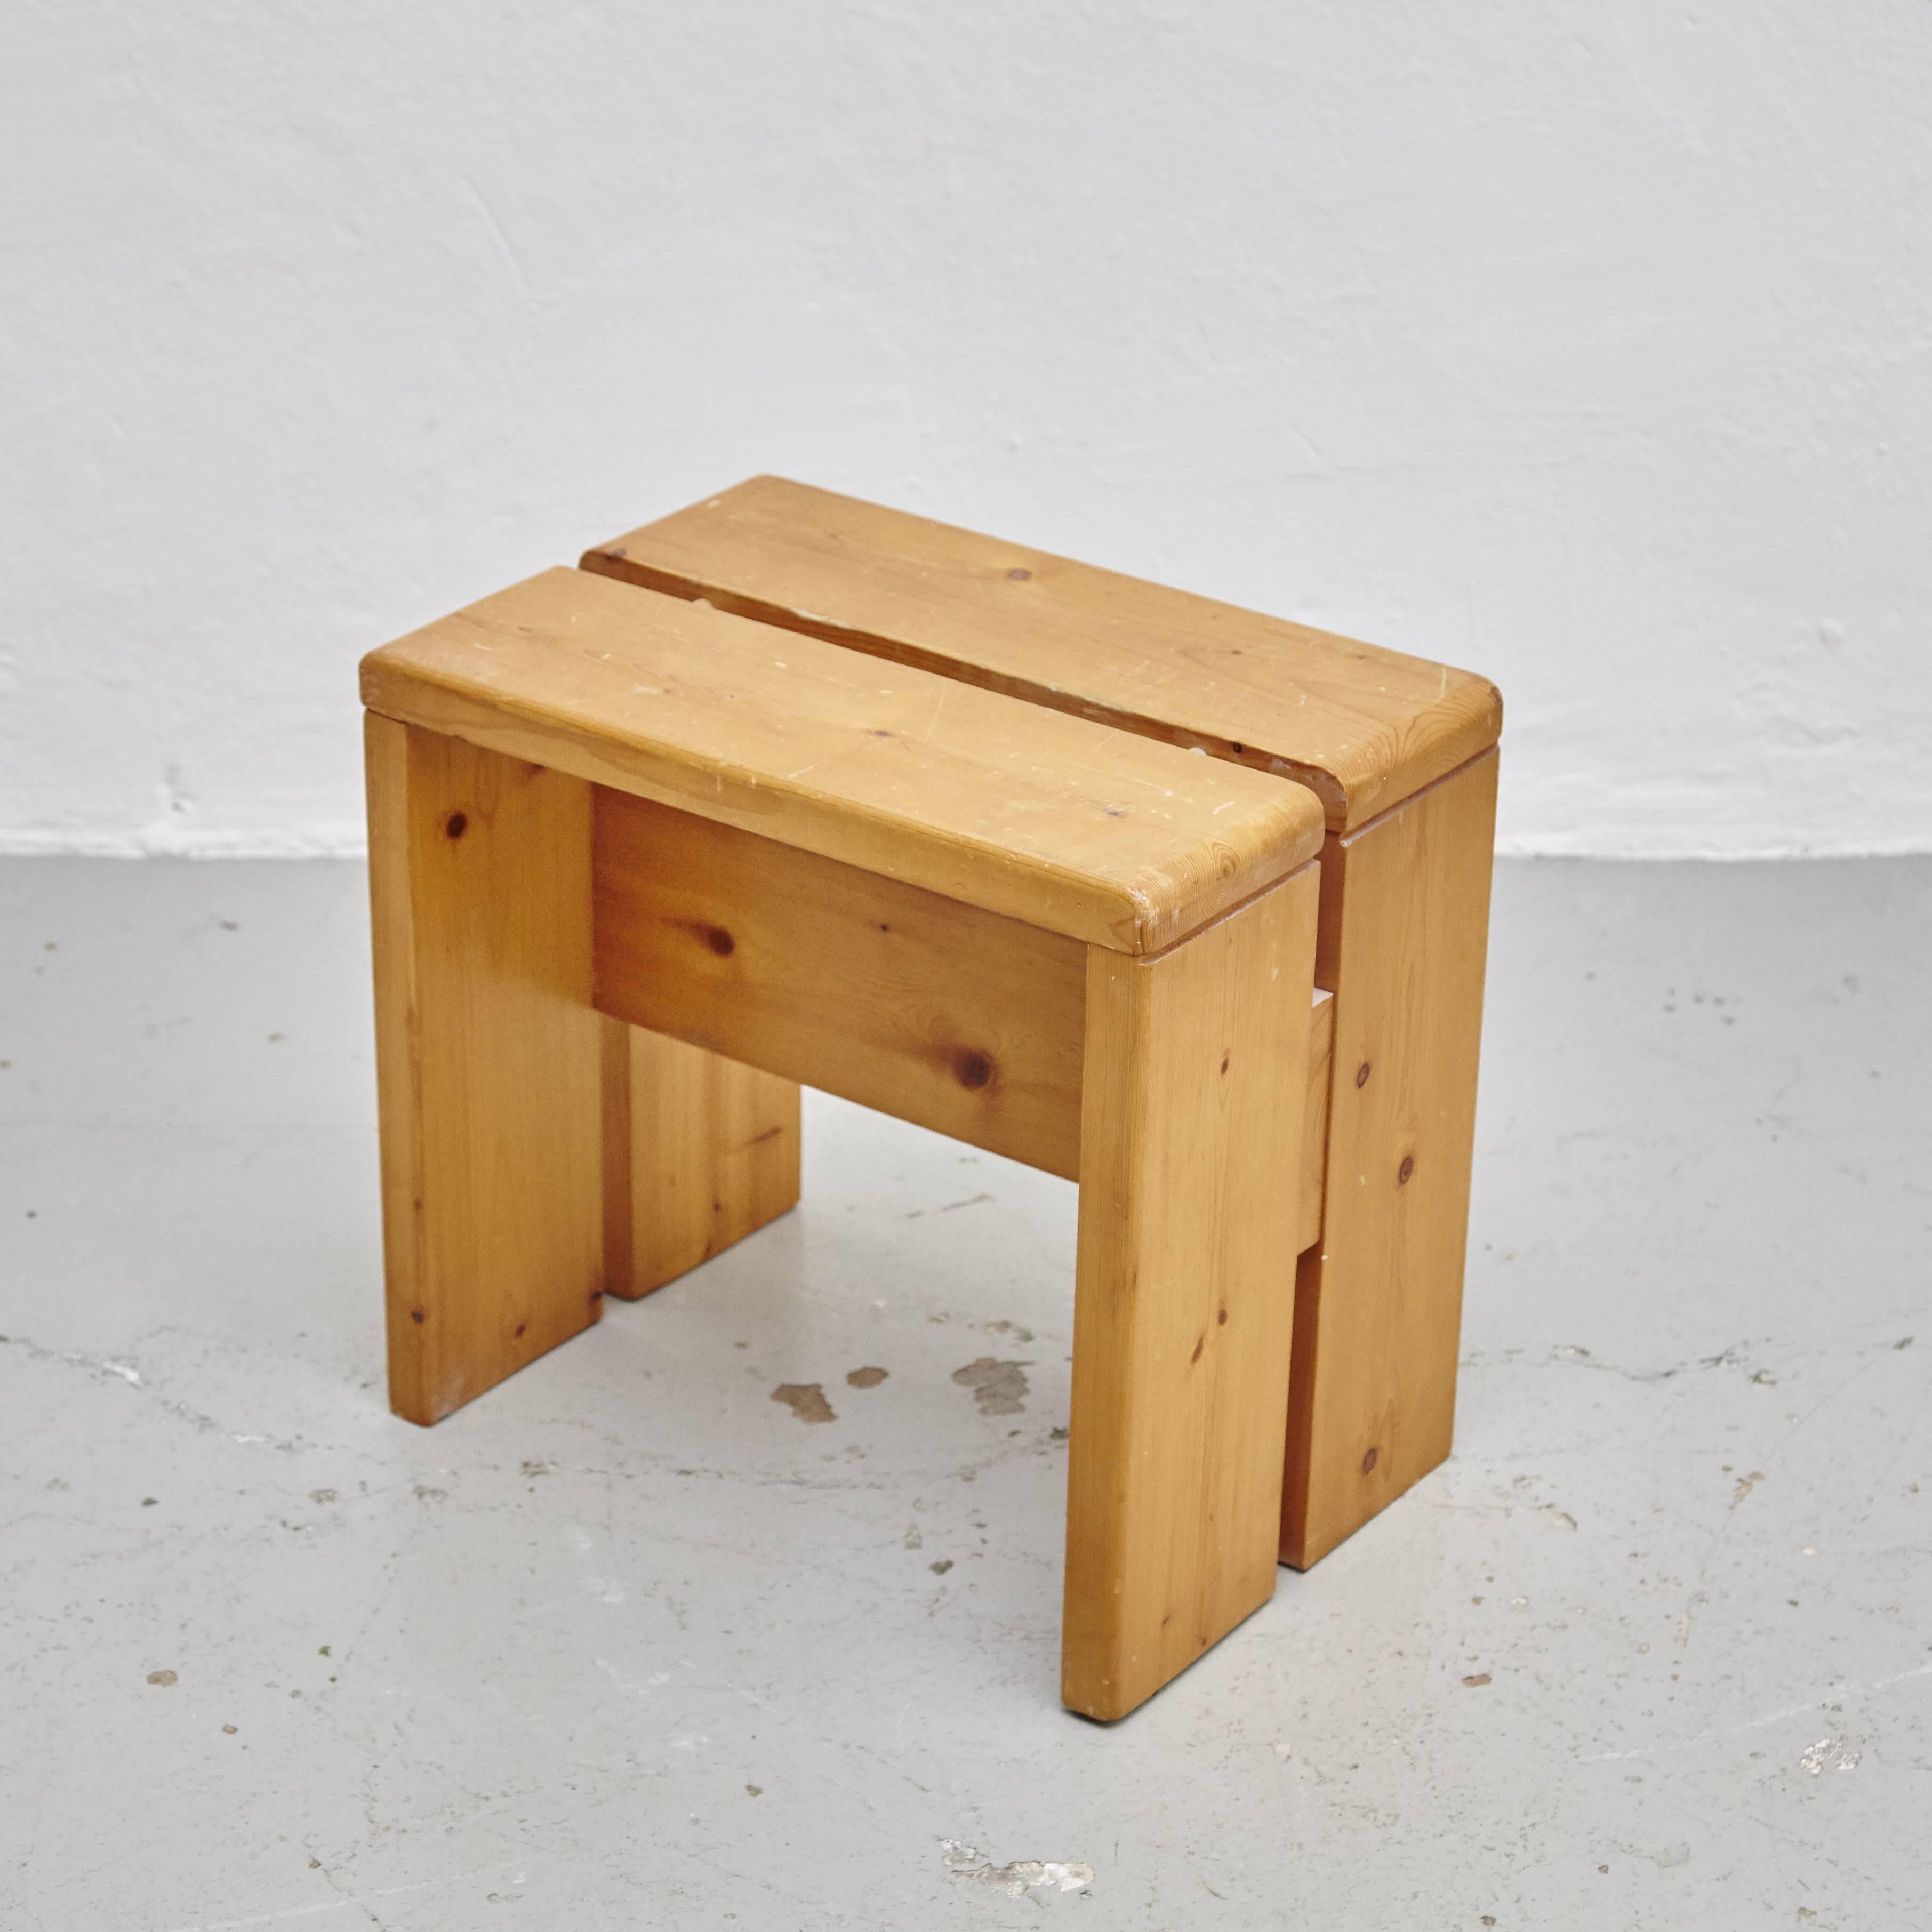 Stool designed by Charlotte Perriand for Les Arcs ski resort, circa 1960.
Manufactured in France.

Pine wood.

In original condition, with minor wear consistent with age and use, preserving a beautiful patina.

Charlotte Perriand (1903 -